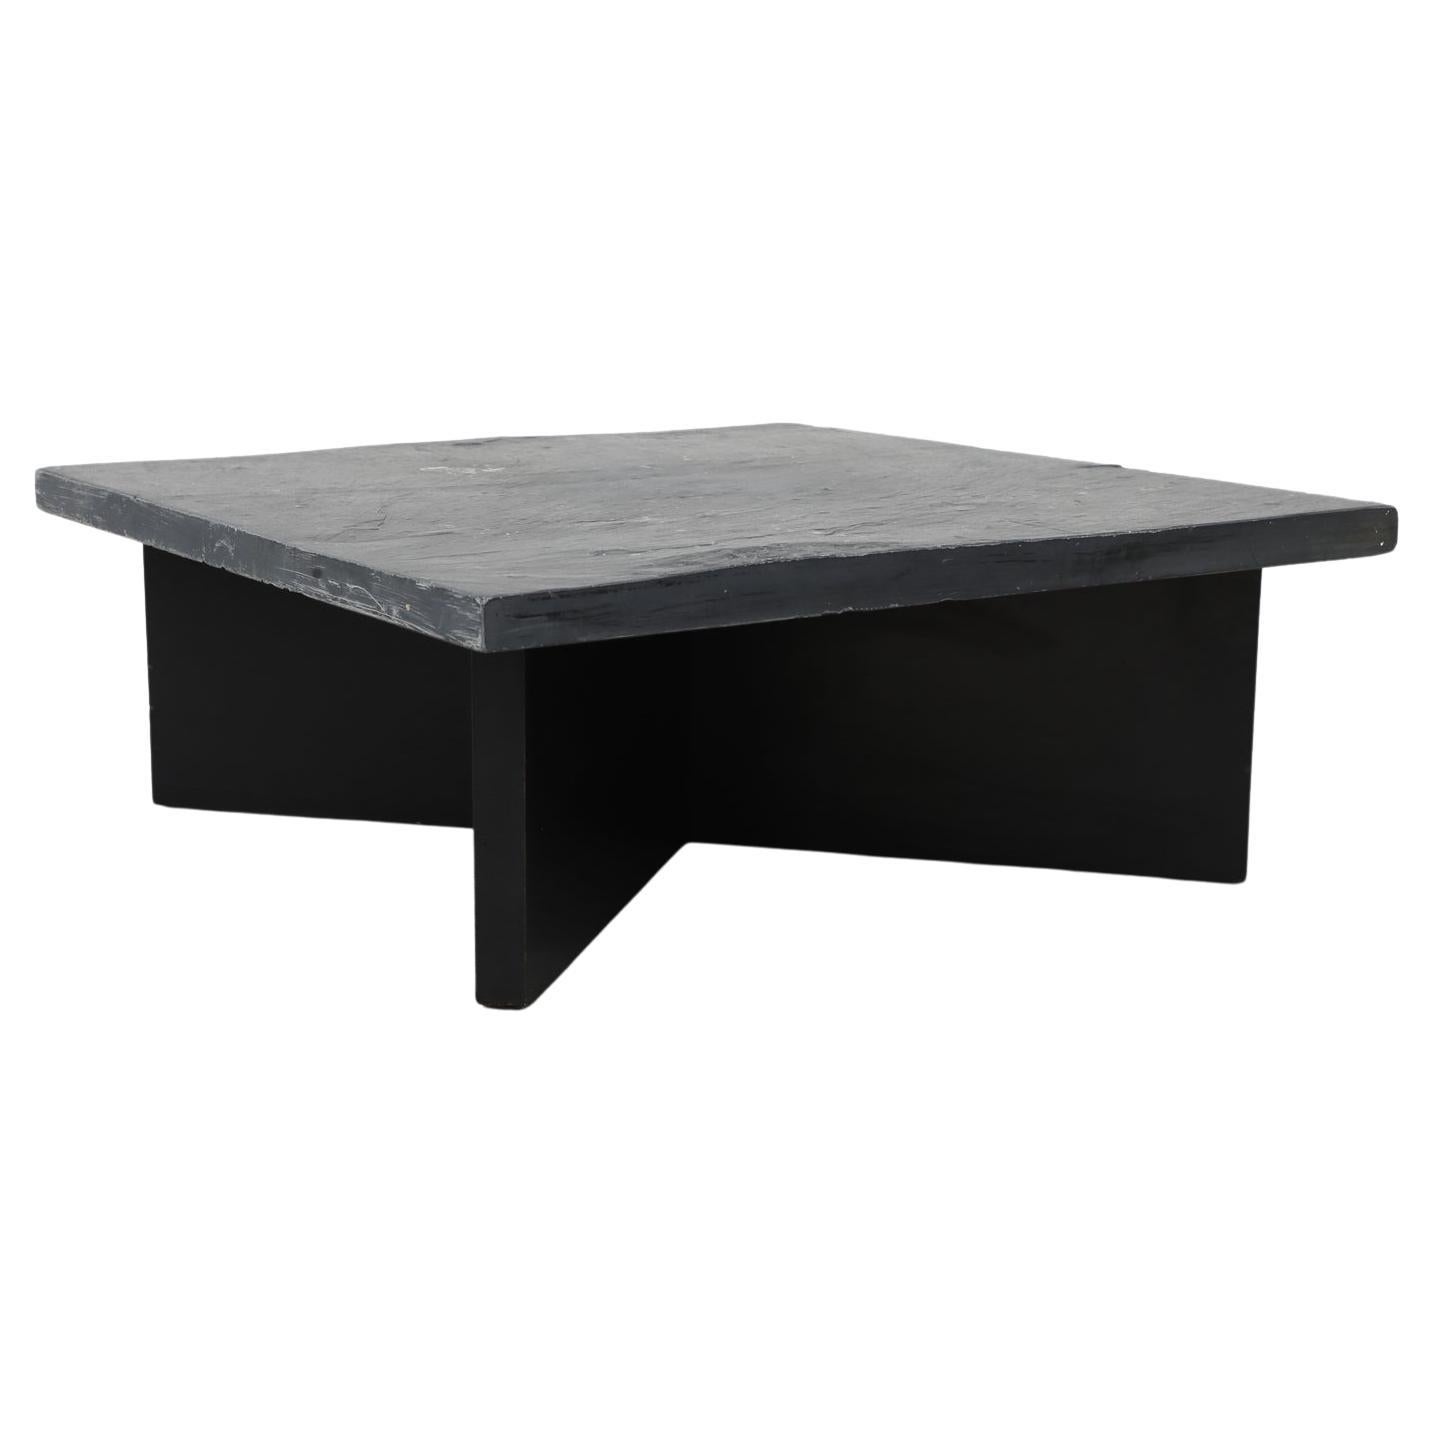 Mid-Century Metaform 'Attributed' stone Coffee Table with Black Wooden x Base